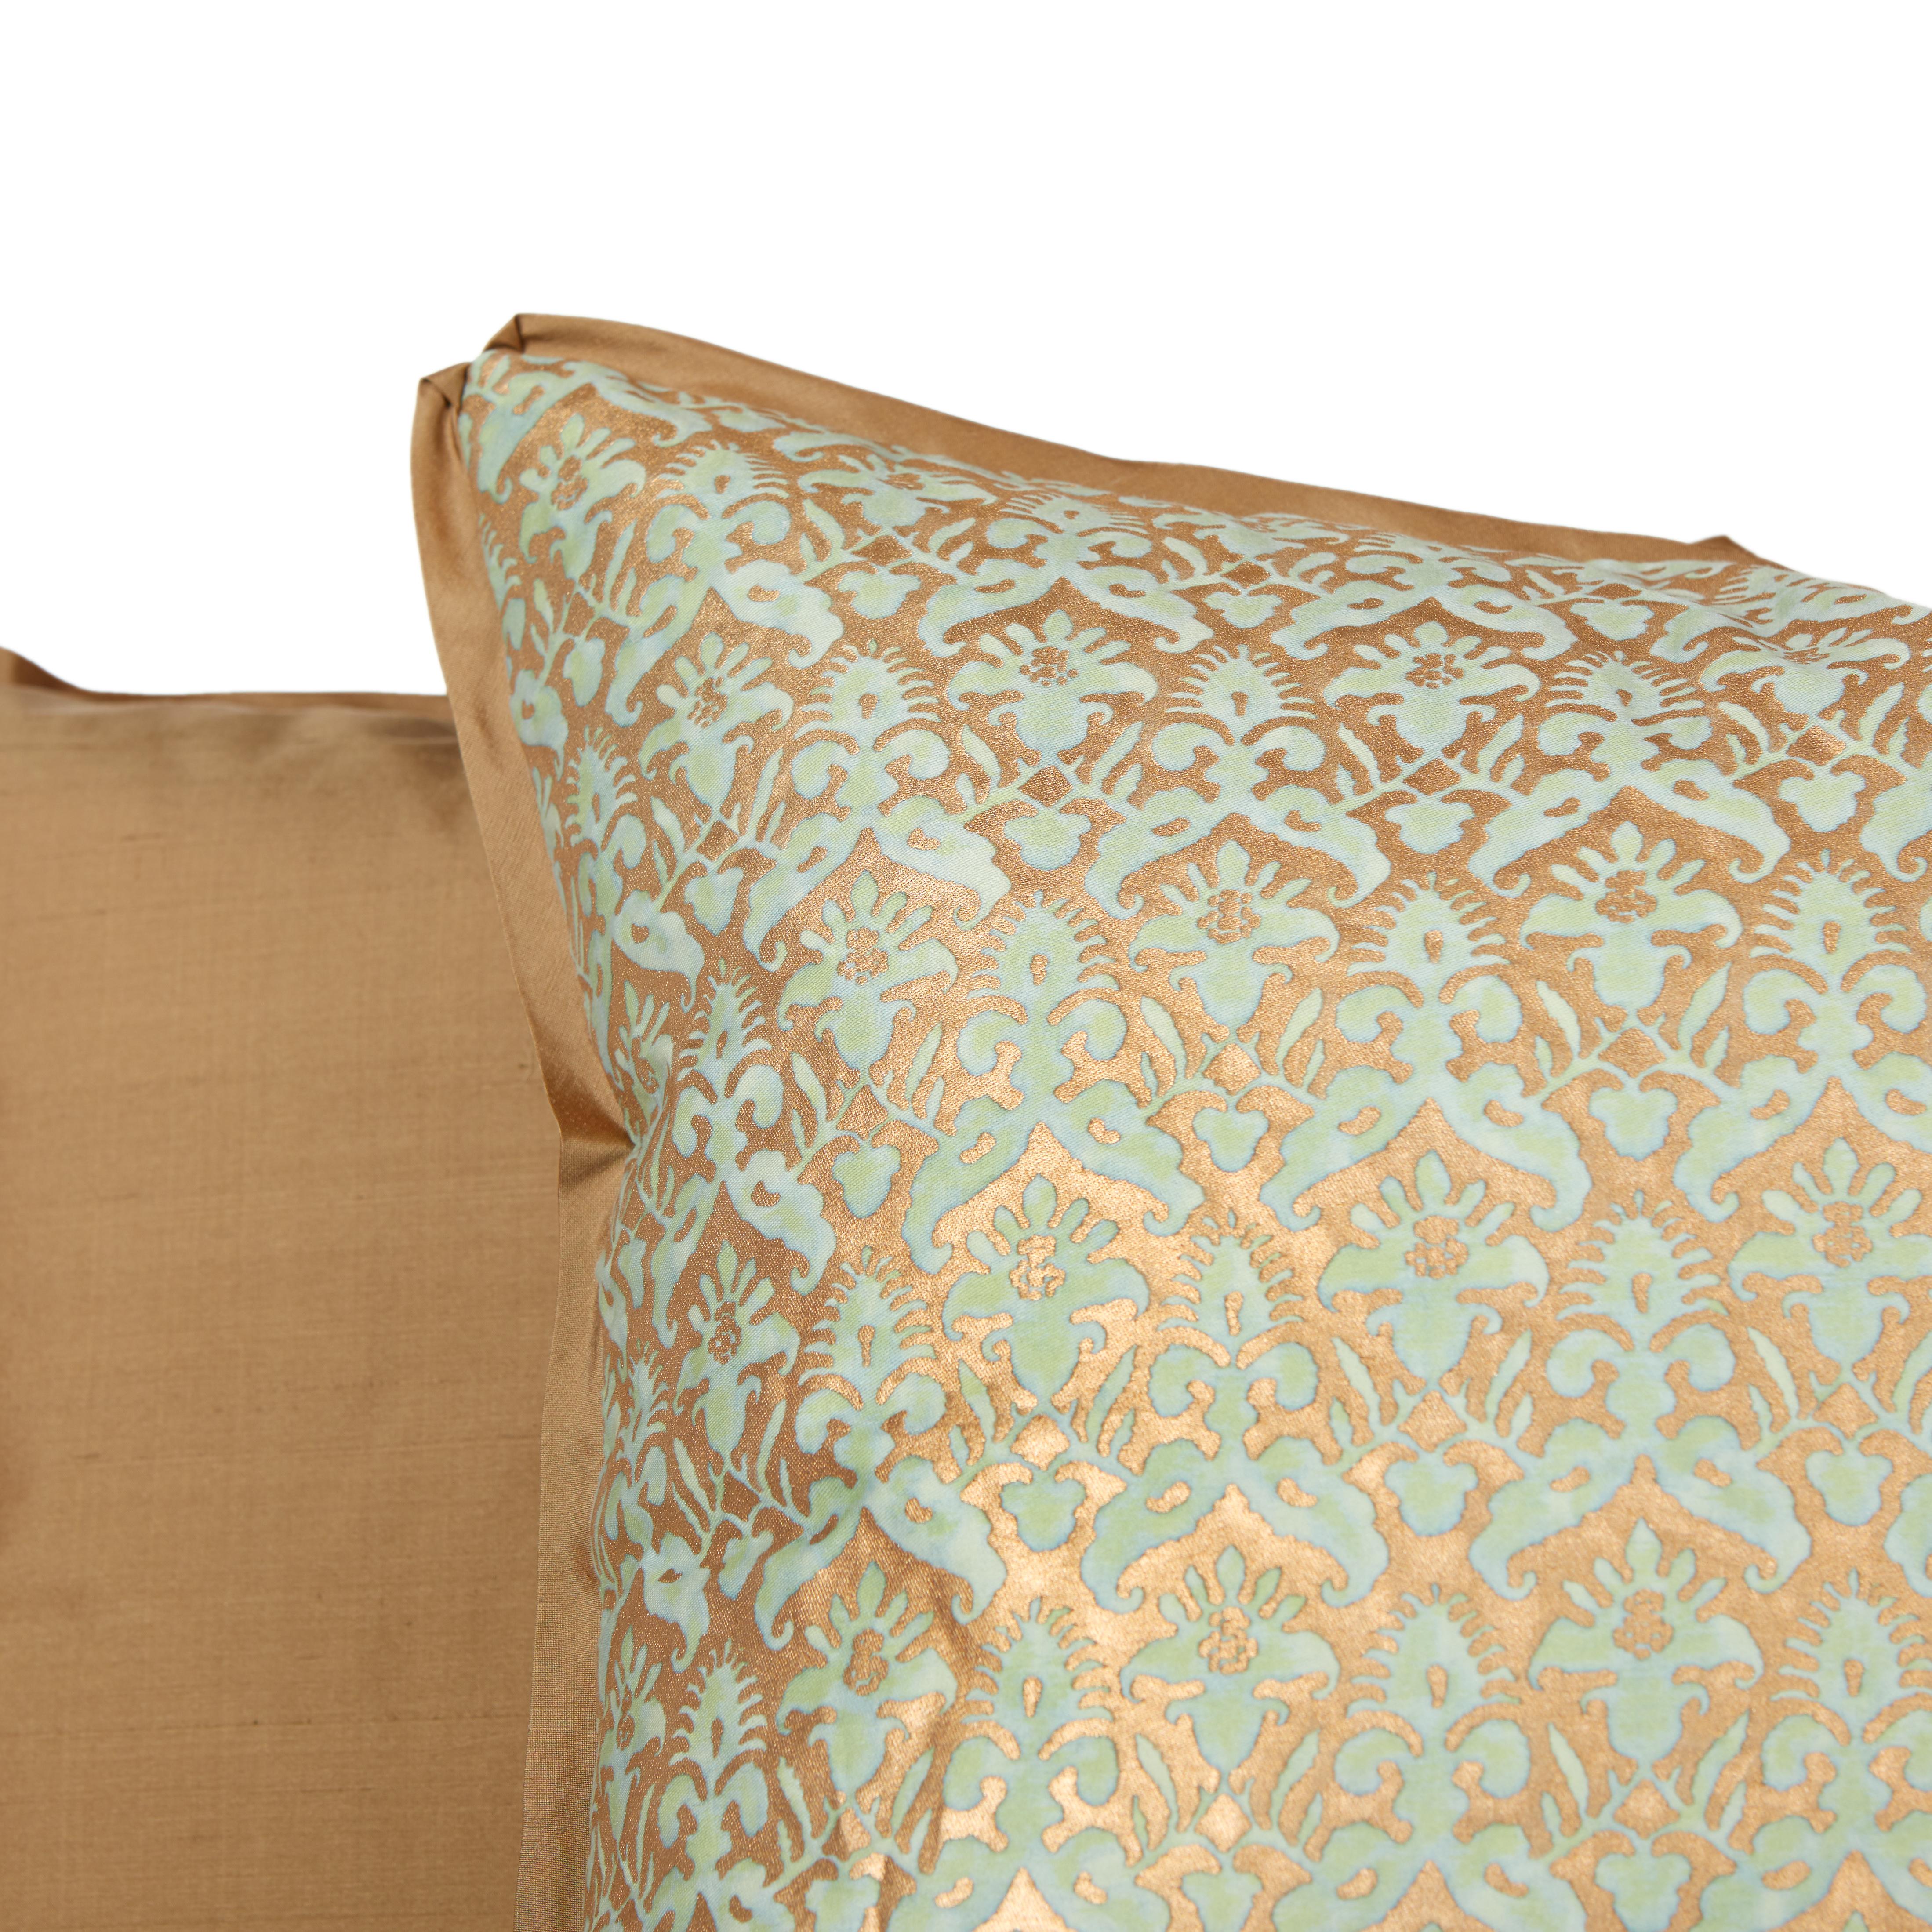 Contemporary Pair of Fortuny Fabric Cushions in the Louis XIII Style Delfino Pattern For Sale